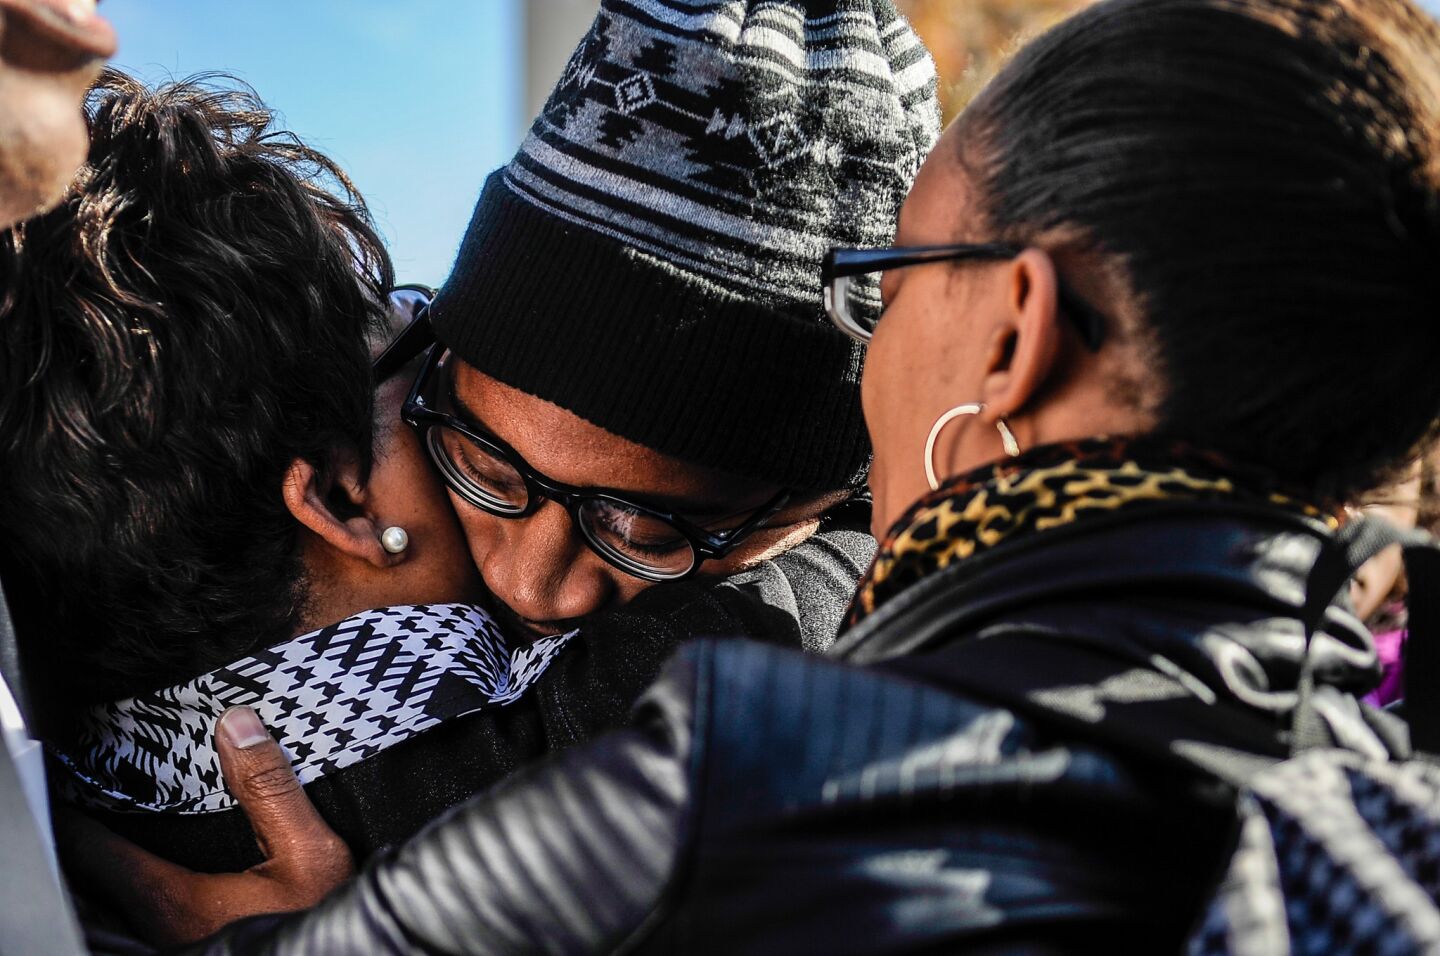 University of Missouri graduate student Jonathan Butler embraces his mother just moments after University of Missouri President Tim Wolfe announced his resignation. Butler held a hunger strike, saying he would not eat until Wolfe resigned.